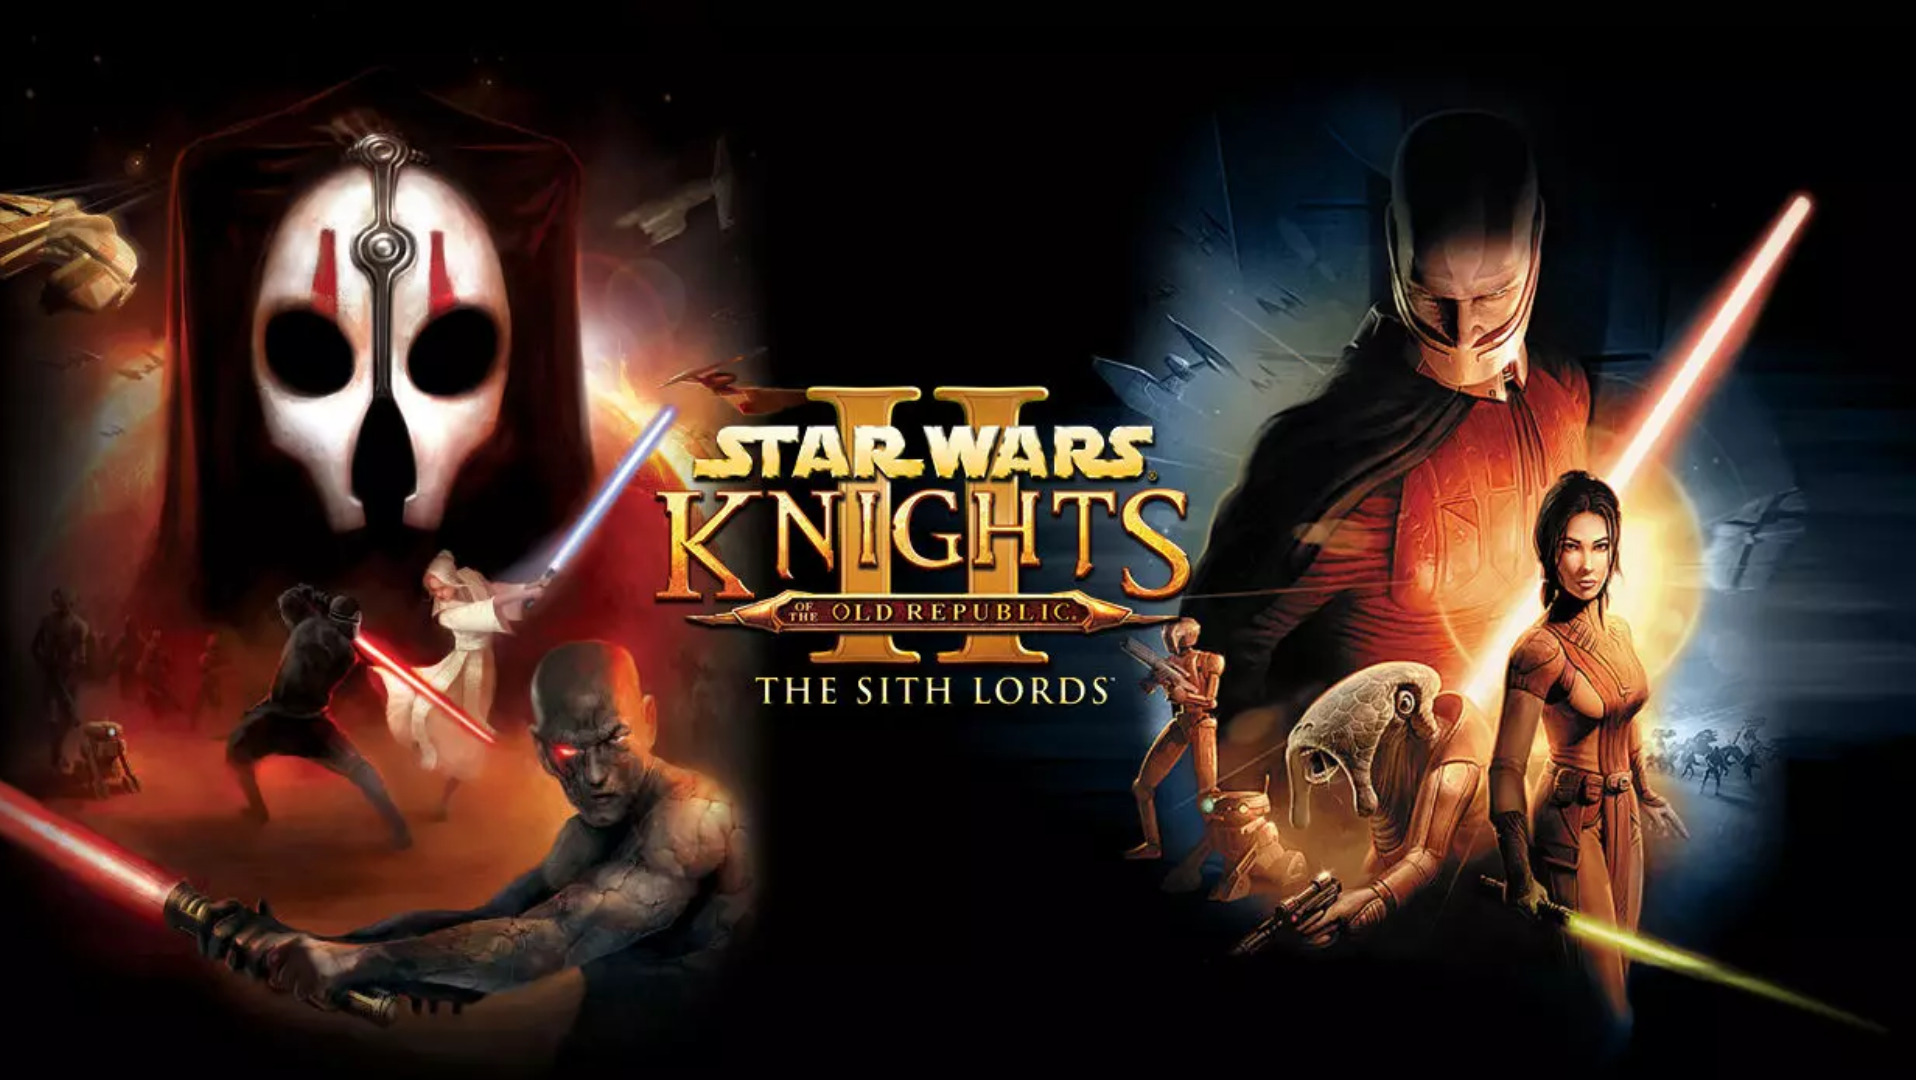  Star Wars Knights of the Old Republic Collection (I